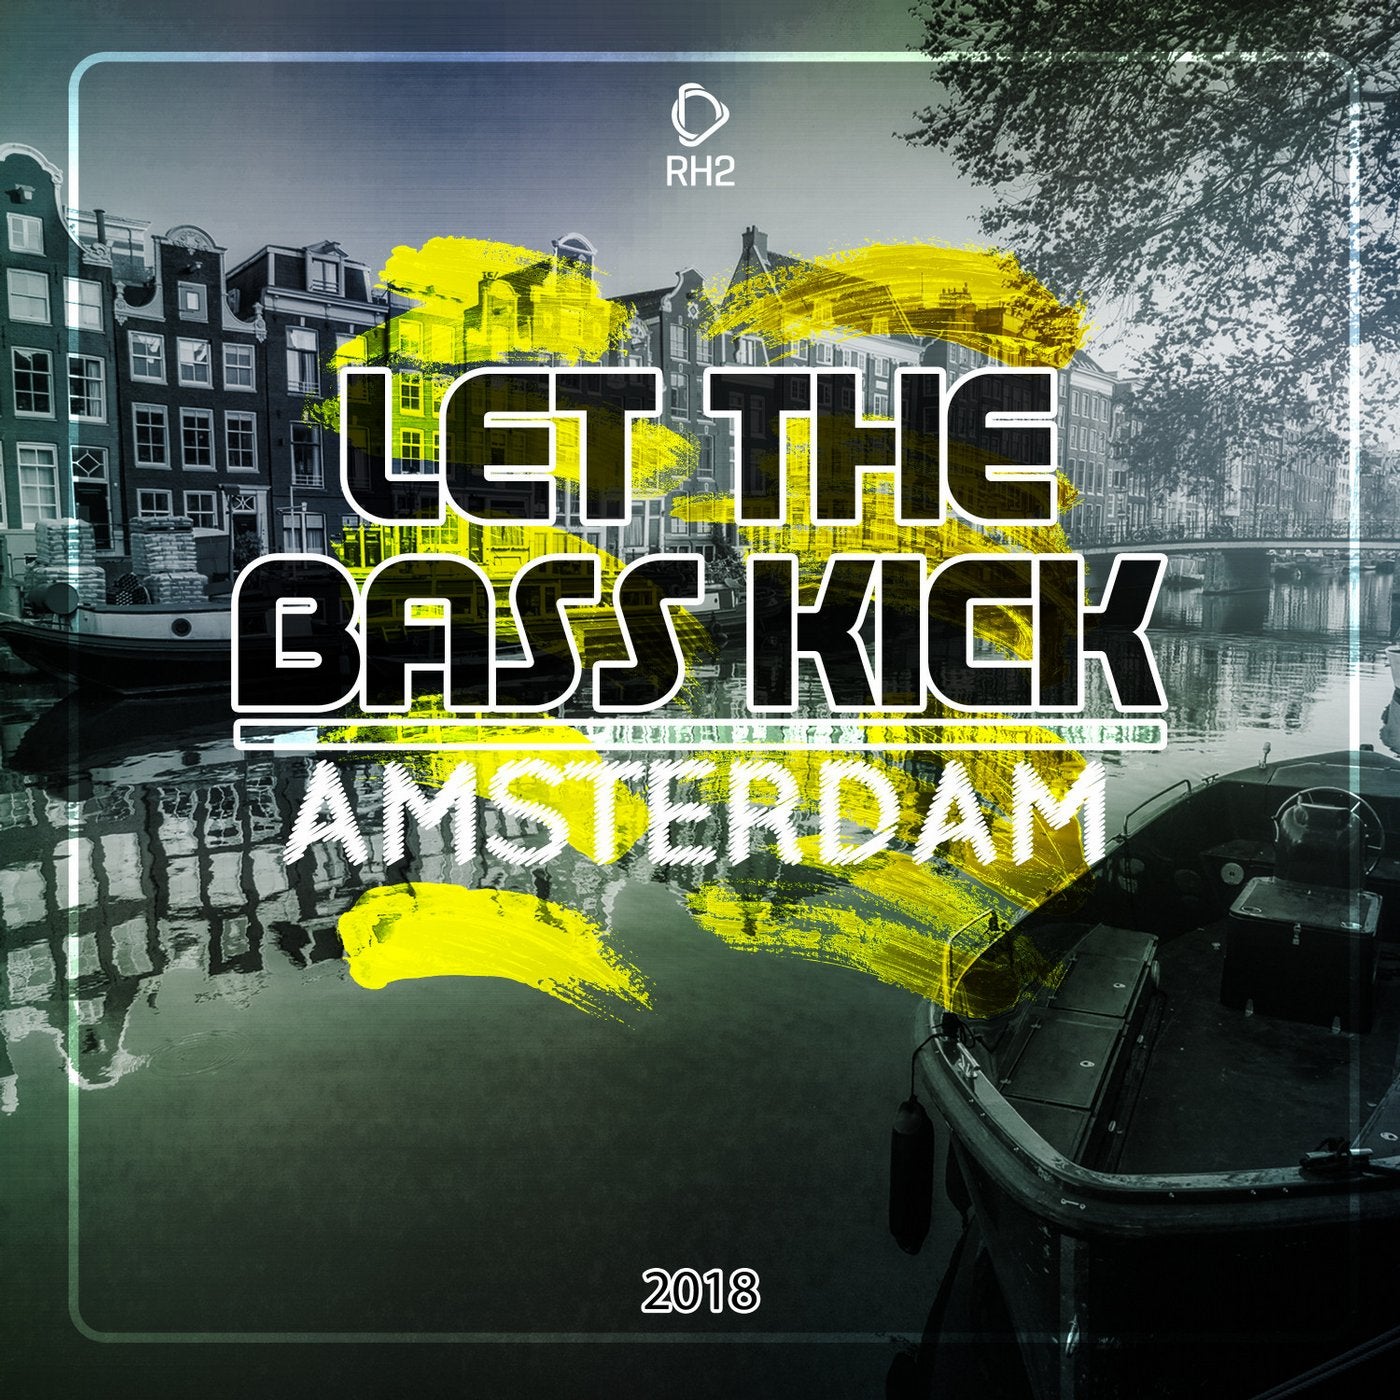 Let The Bass Kick In Amsterdam 2018